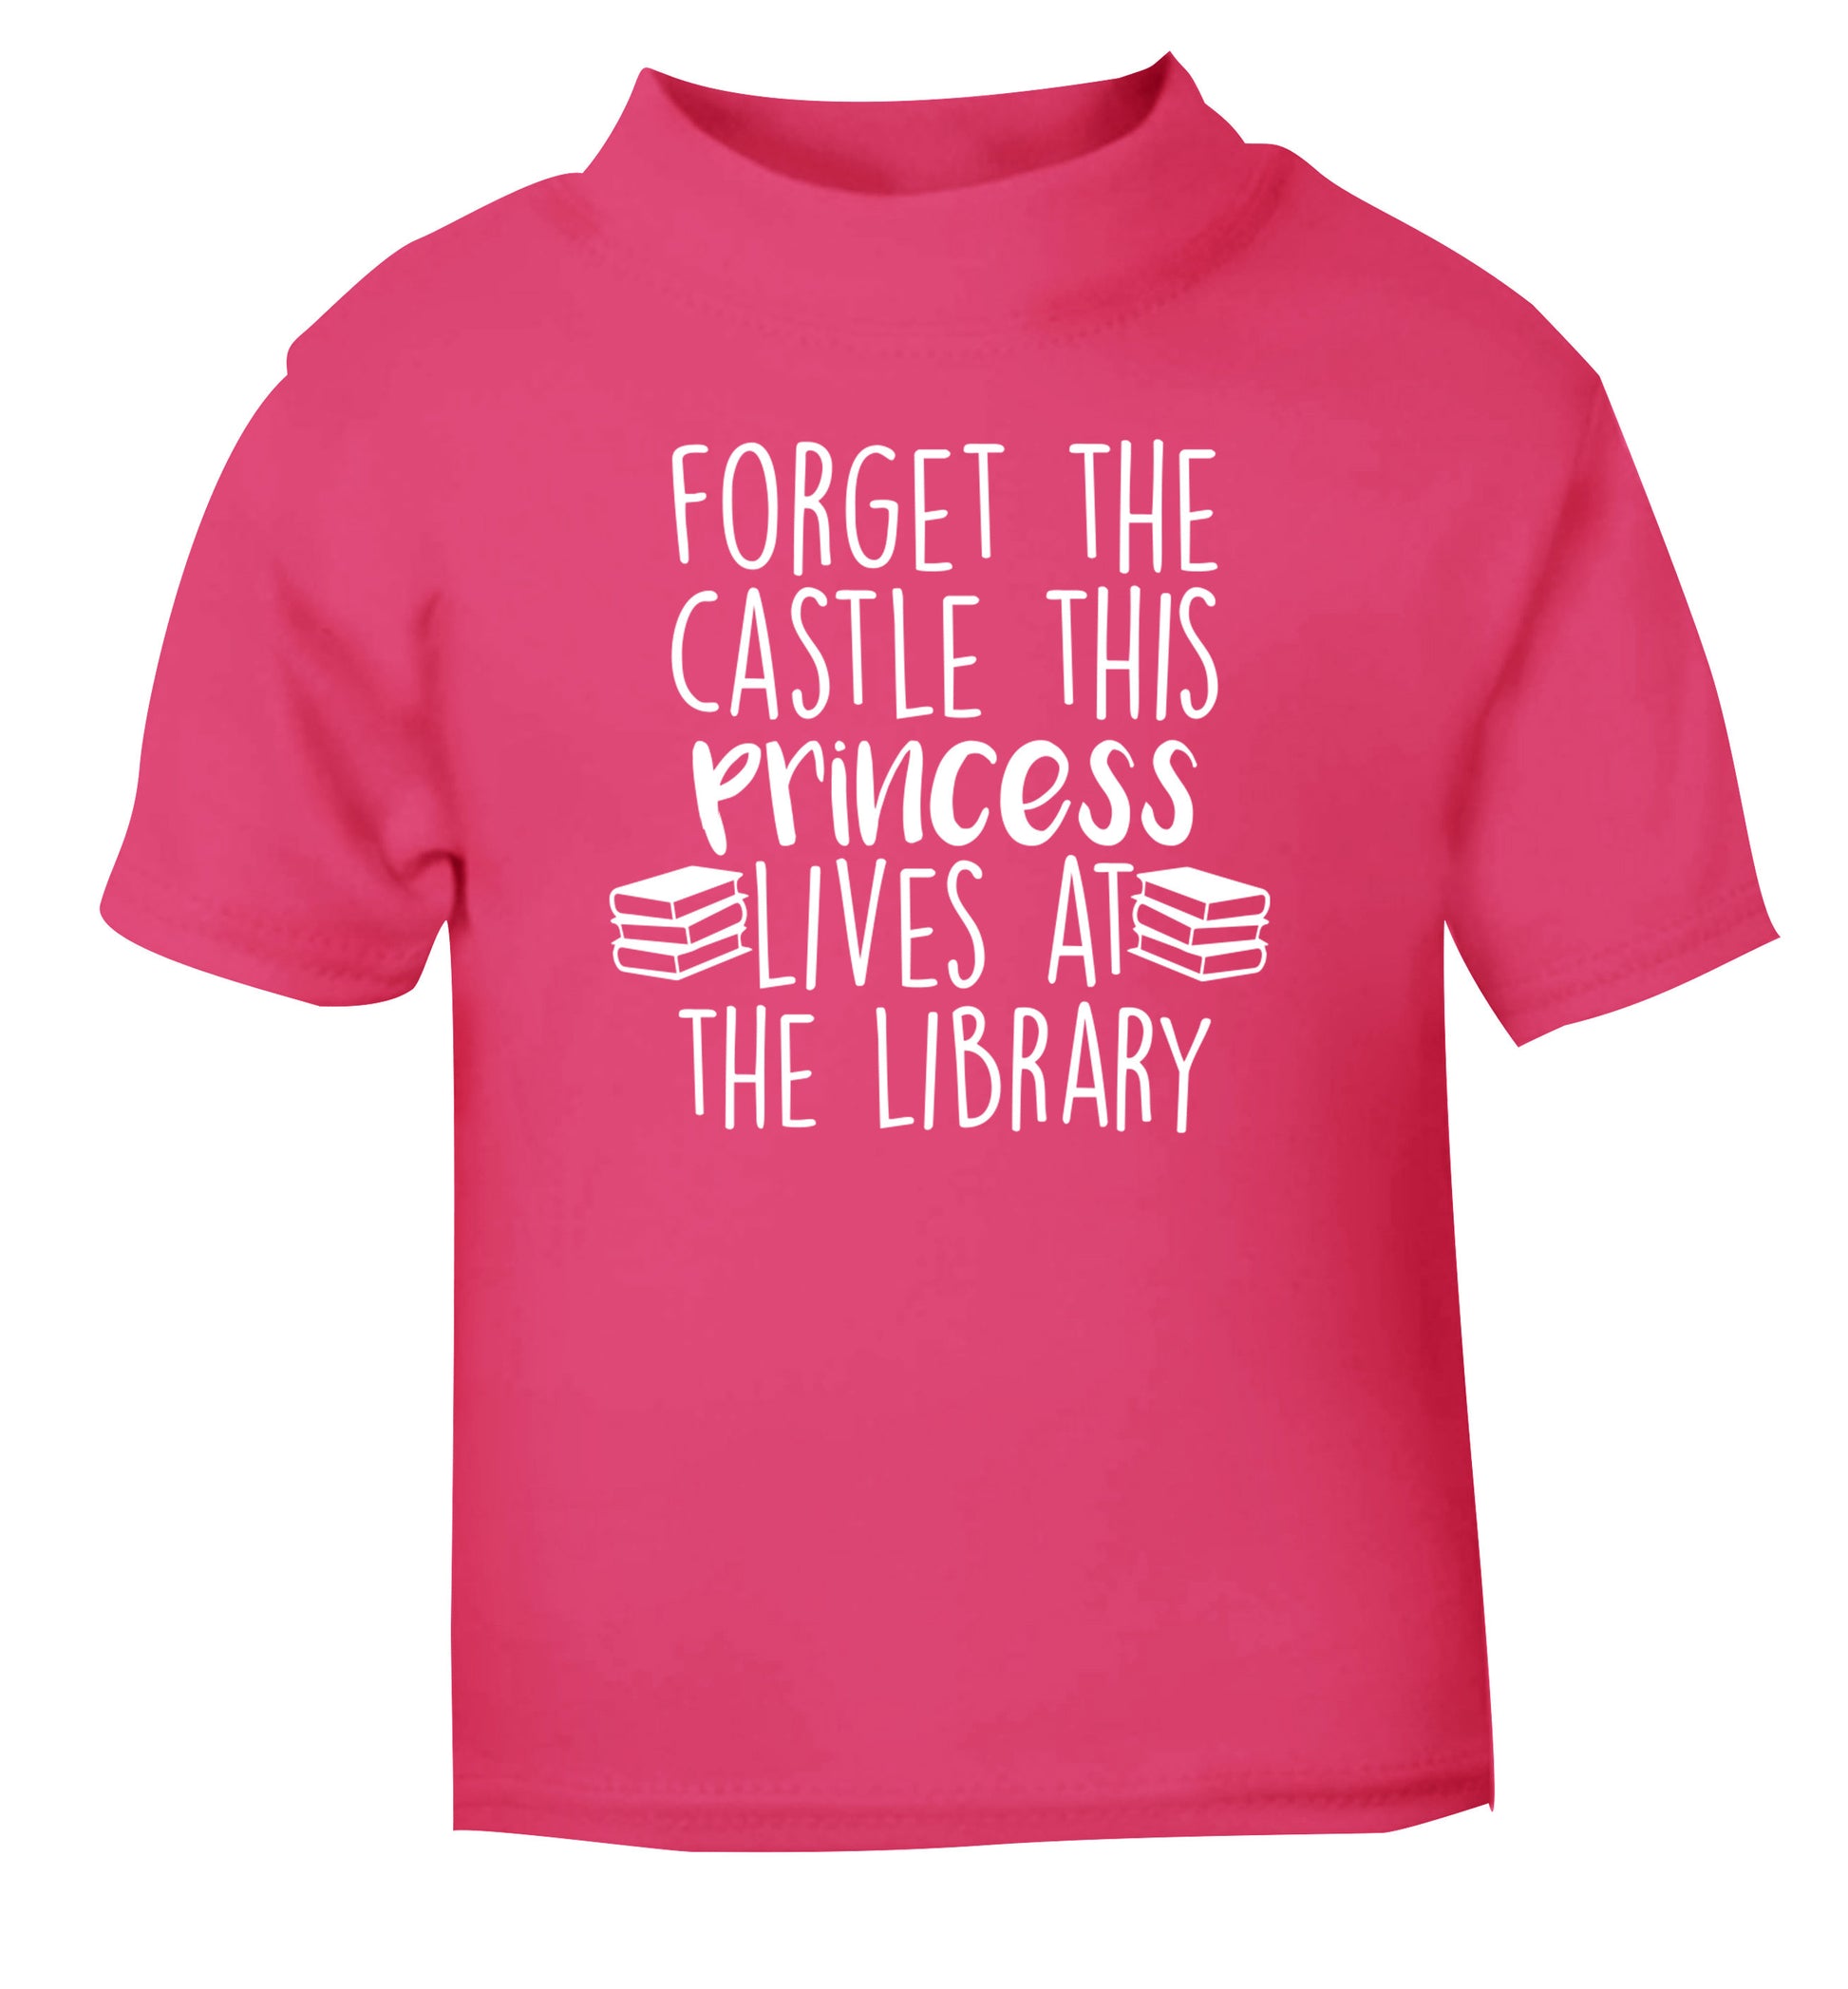 Forget the castle this princess lives at the library pink Baby Toddler Tshirt 2 Years